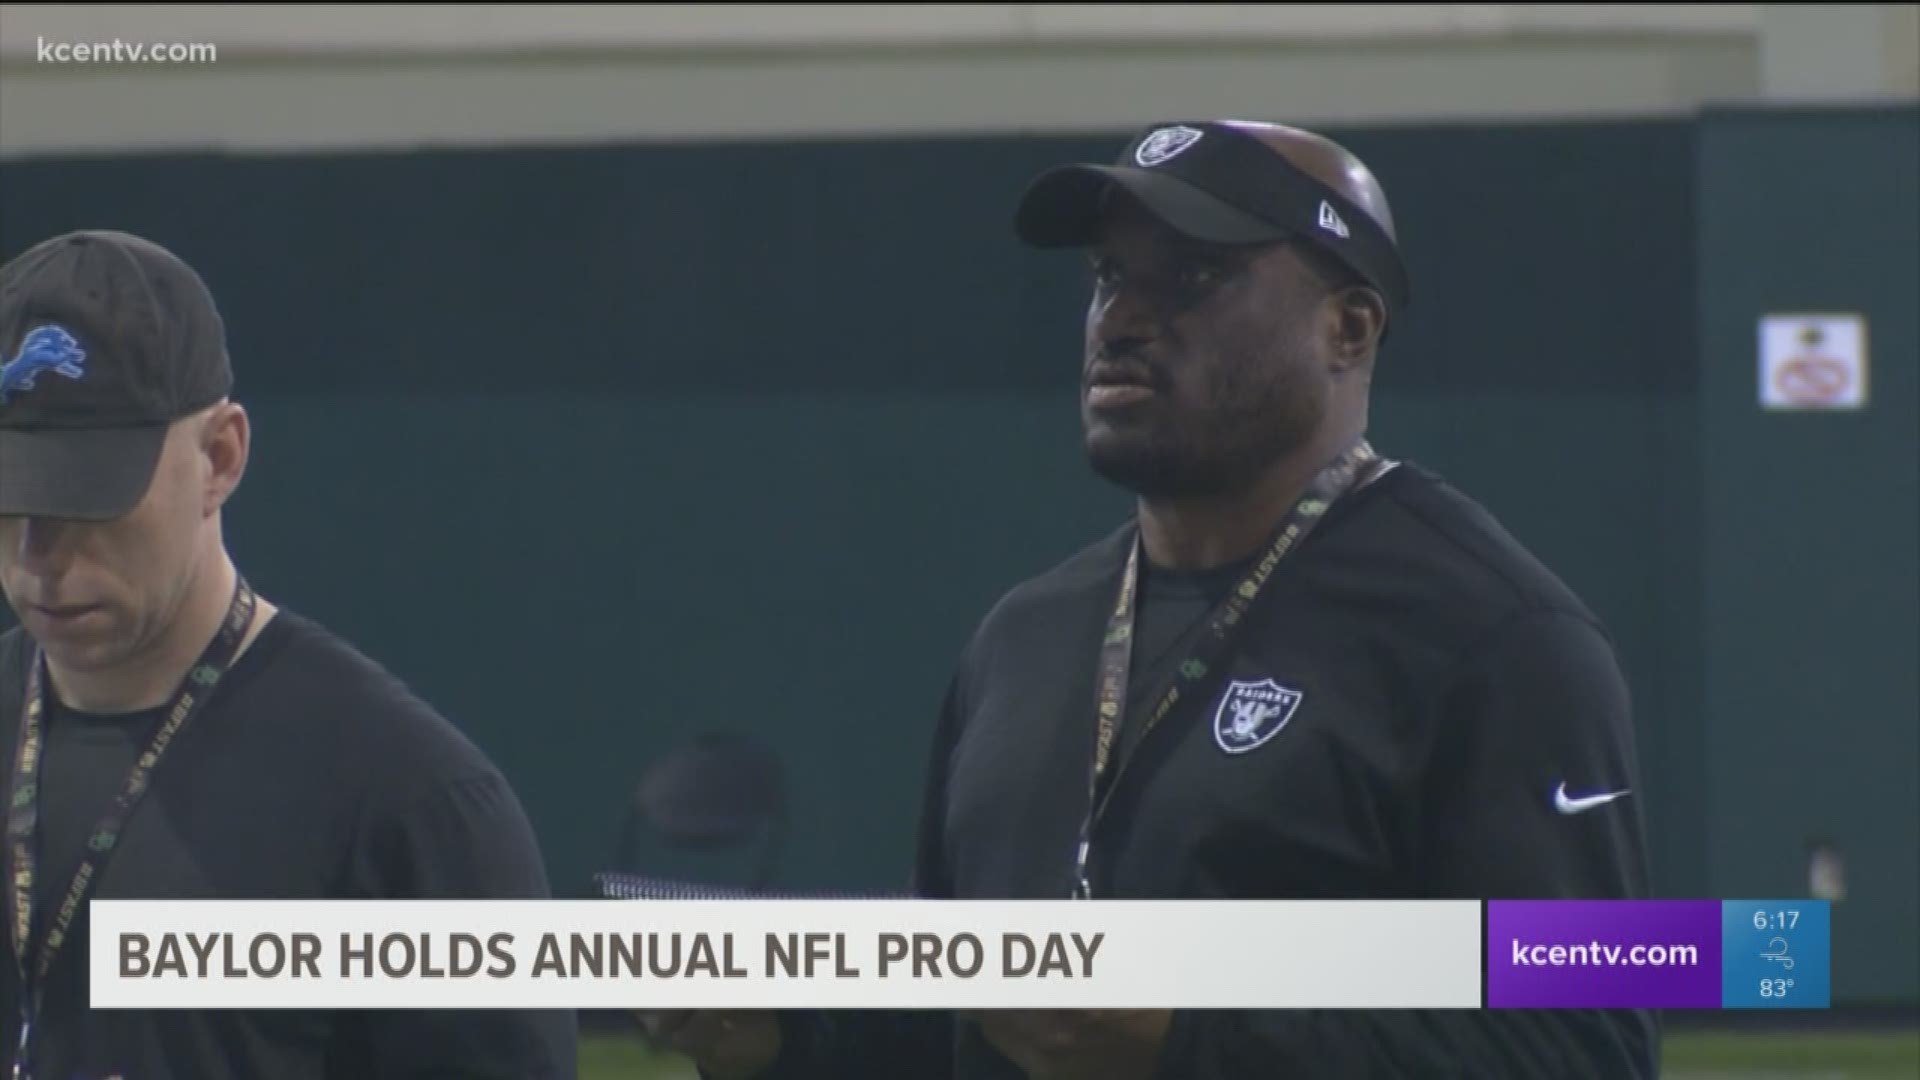 Baylor holds annual NFL Pro Day